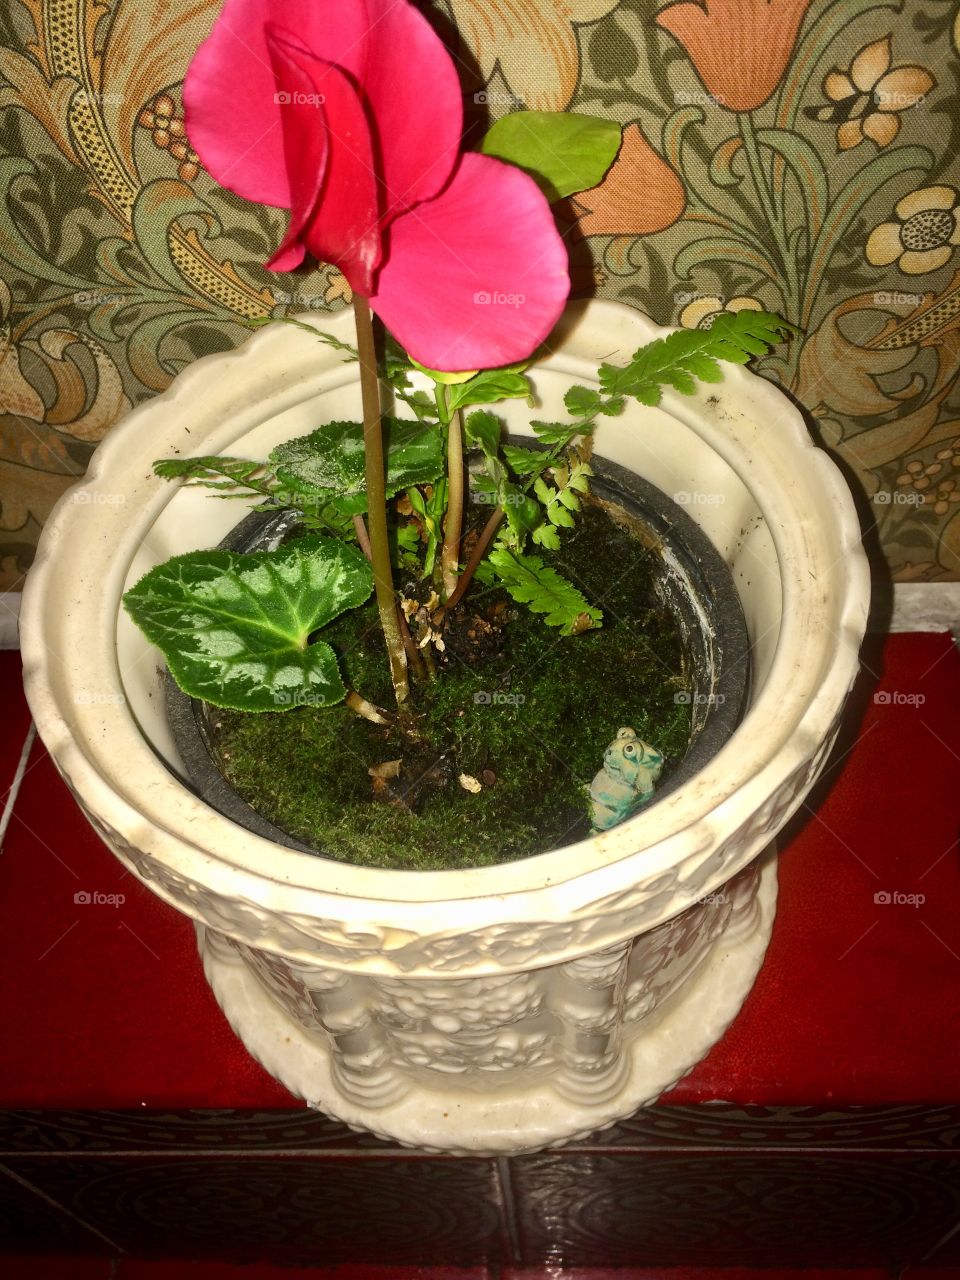 A Little world In A pot loves where it lives reminds you all the time;)